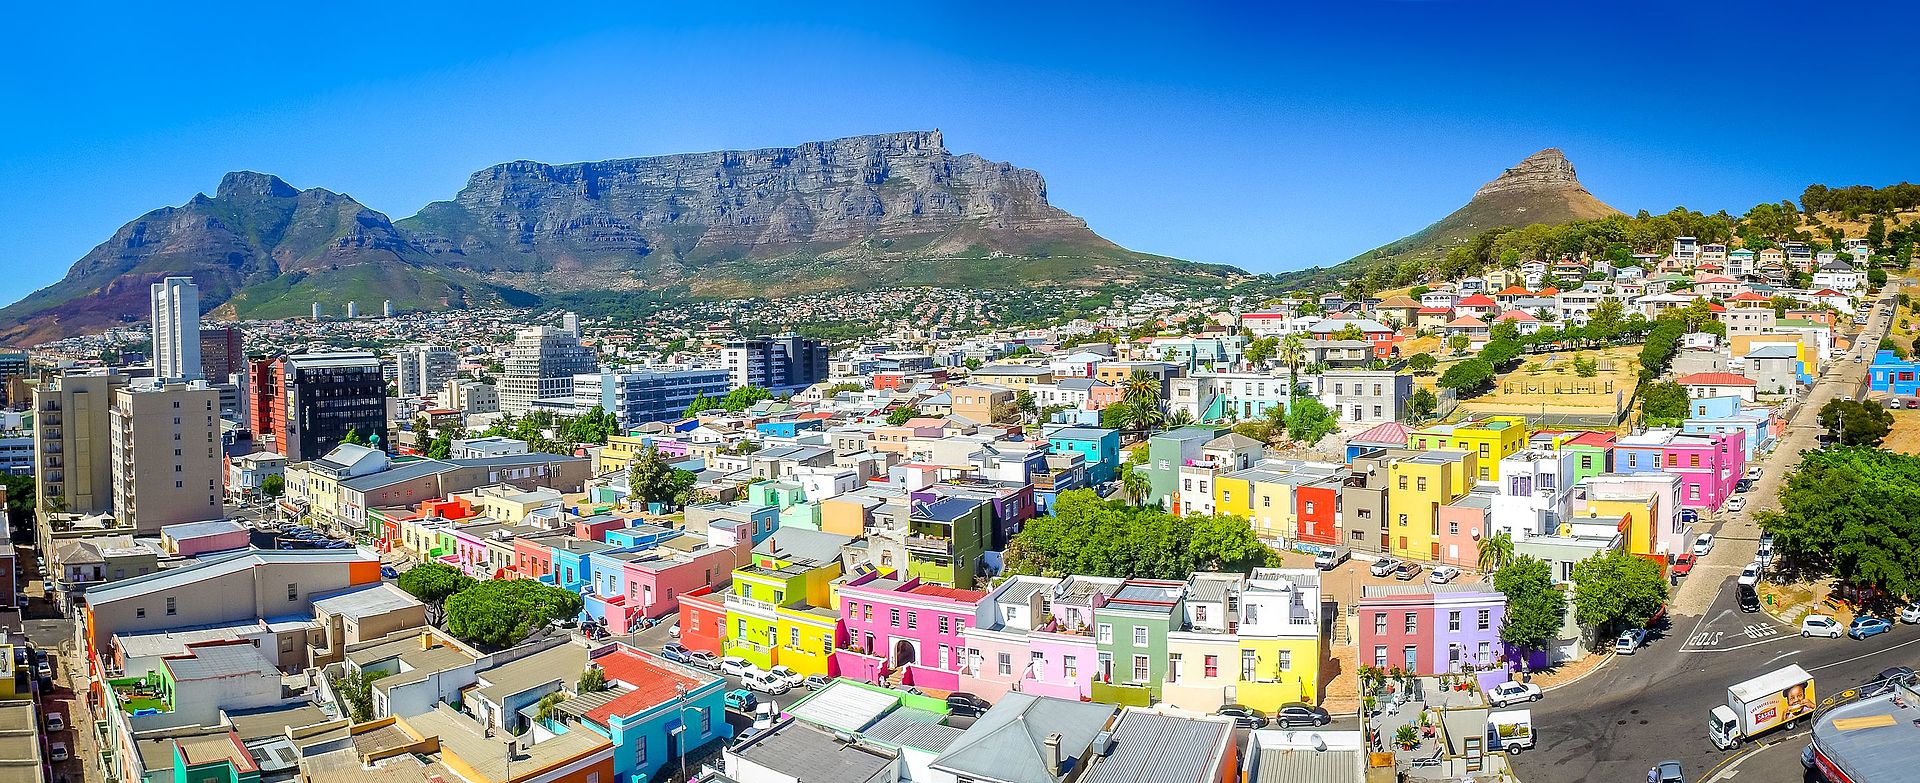 Bo-Kaap area of Cape Town with its distinctive pastel-colored houses in the foreground with the city centre to the left and Table Mountain in the background - Author: SkyPixels - CC BY-SA 4.0